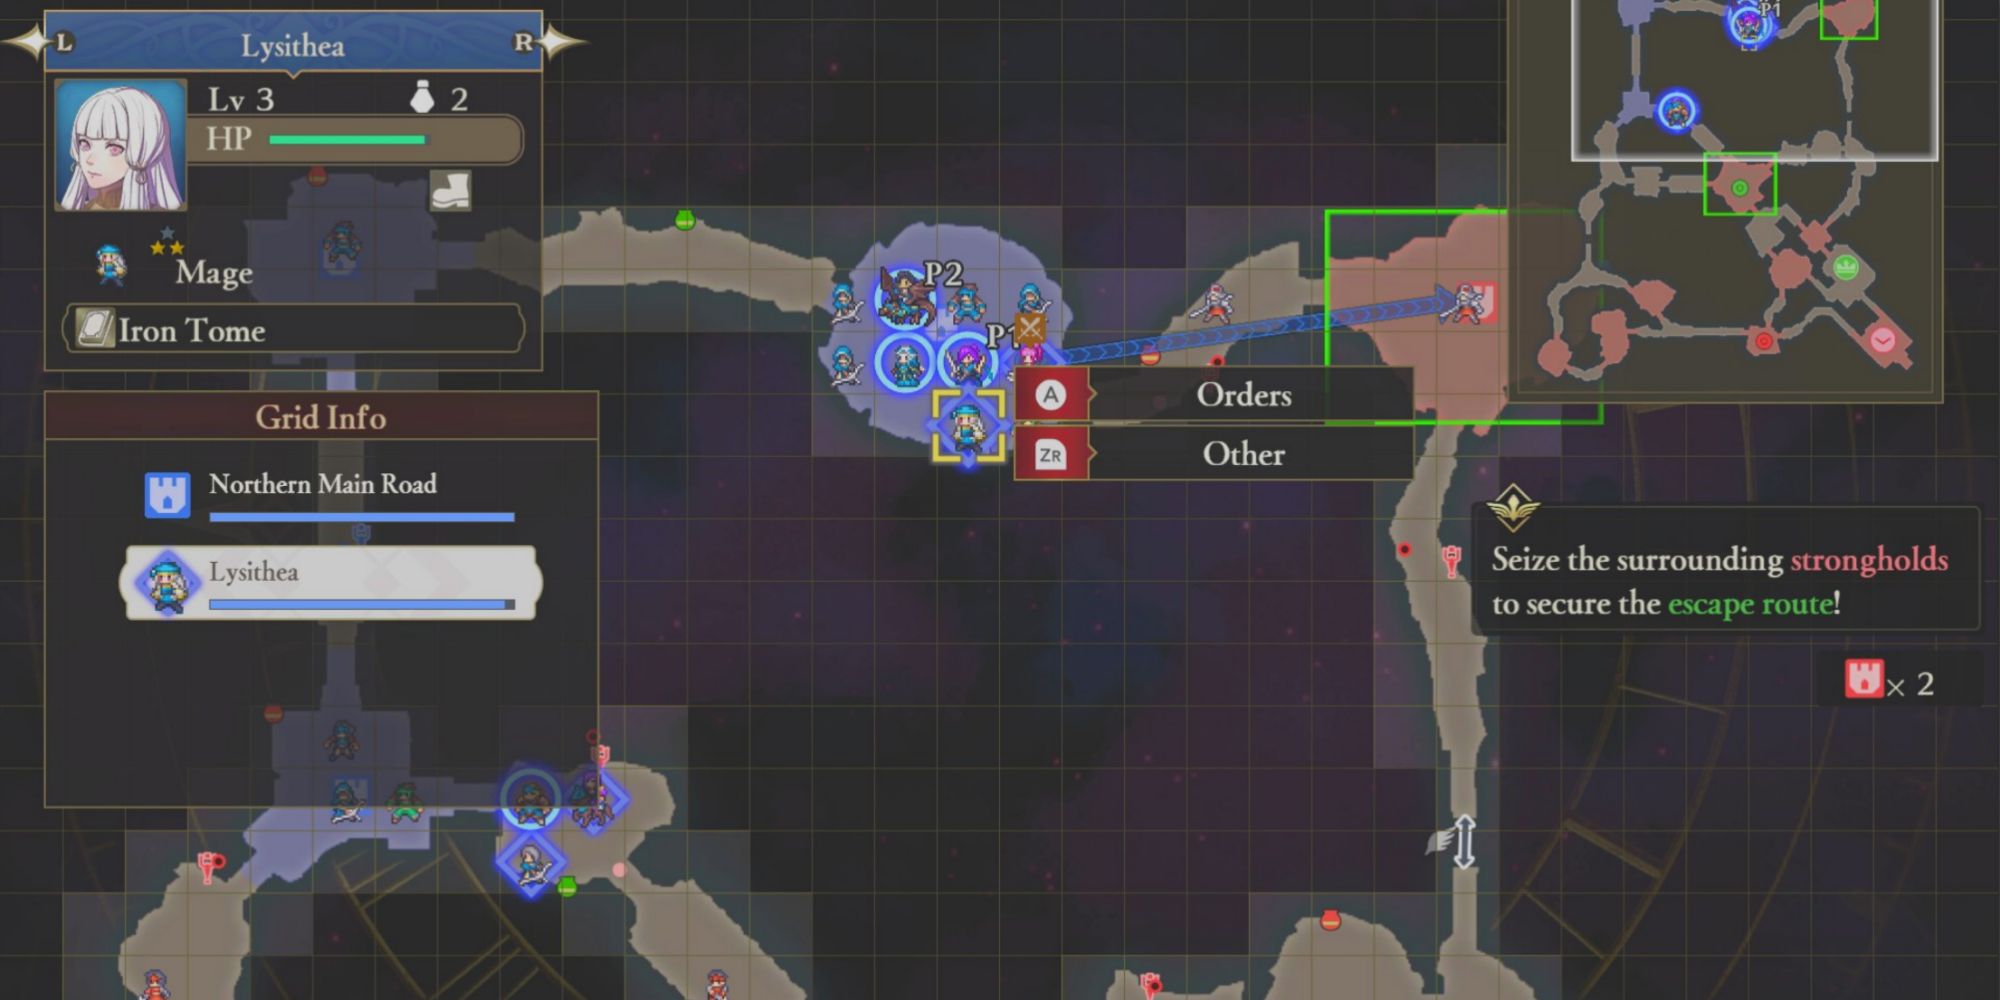 Player one assigns Lysithea the order to attack a stronghold on the battle map